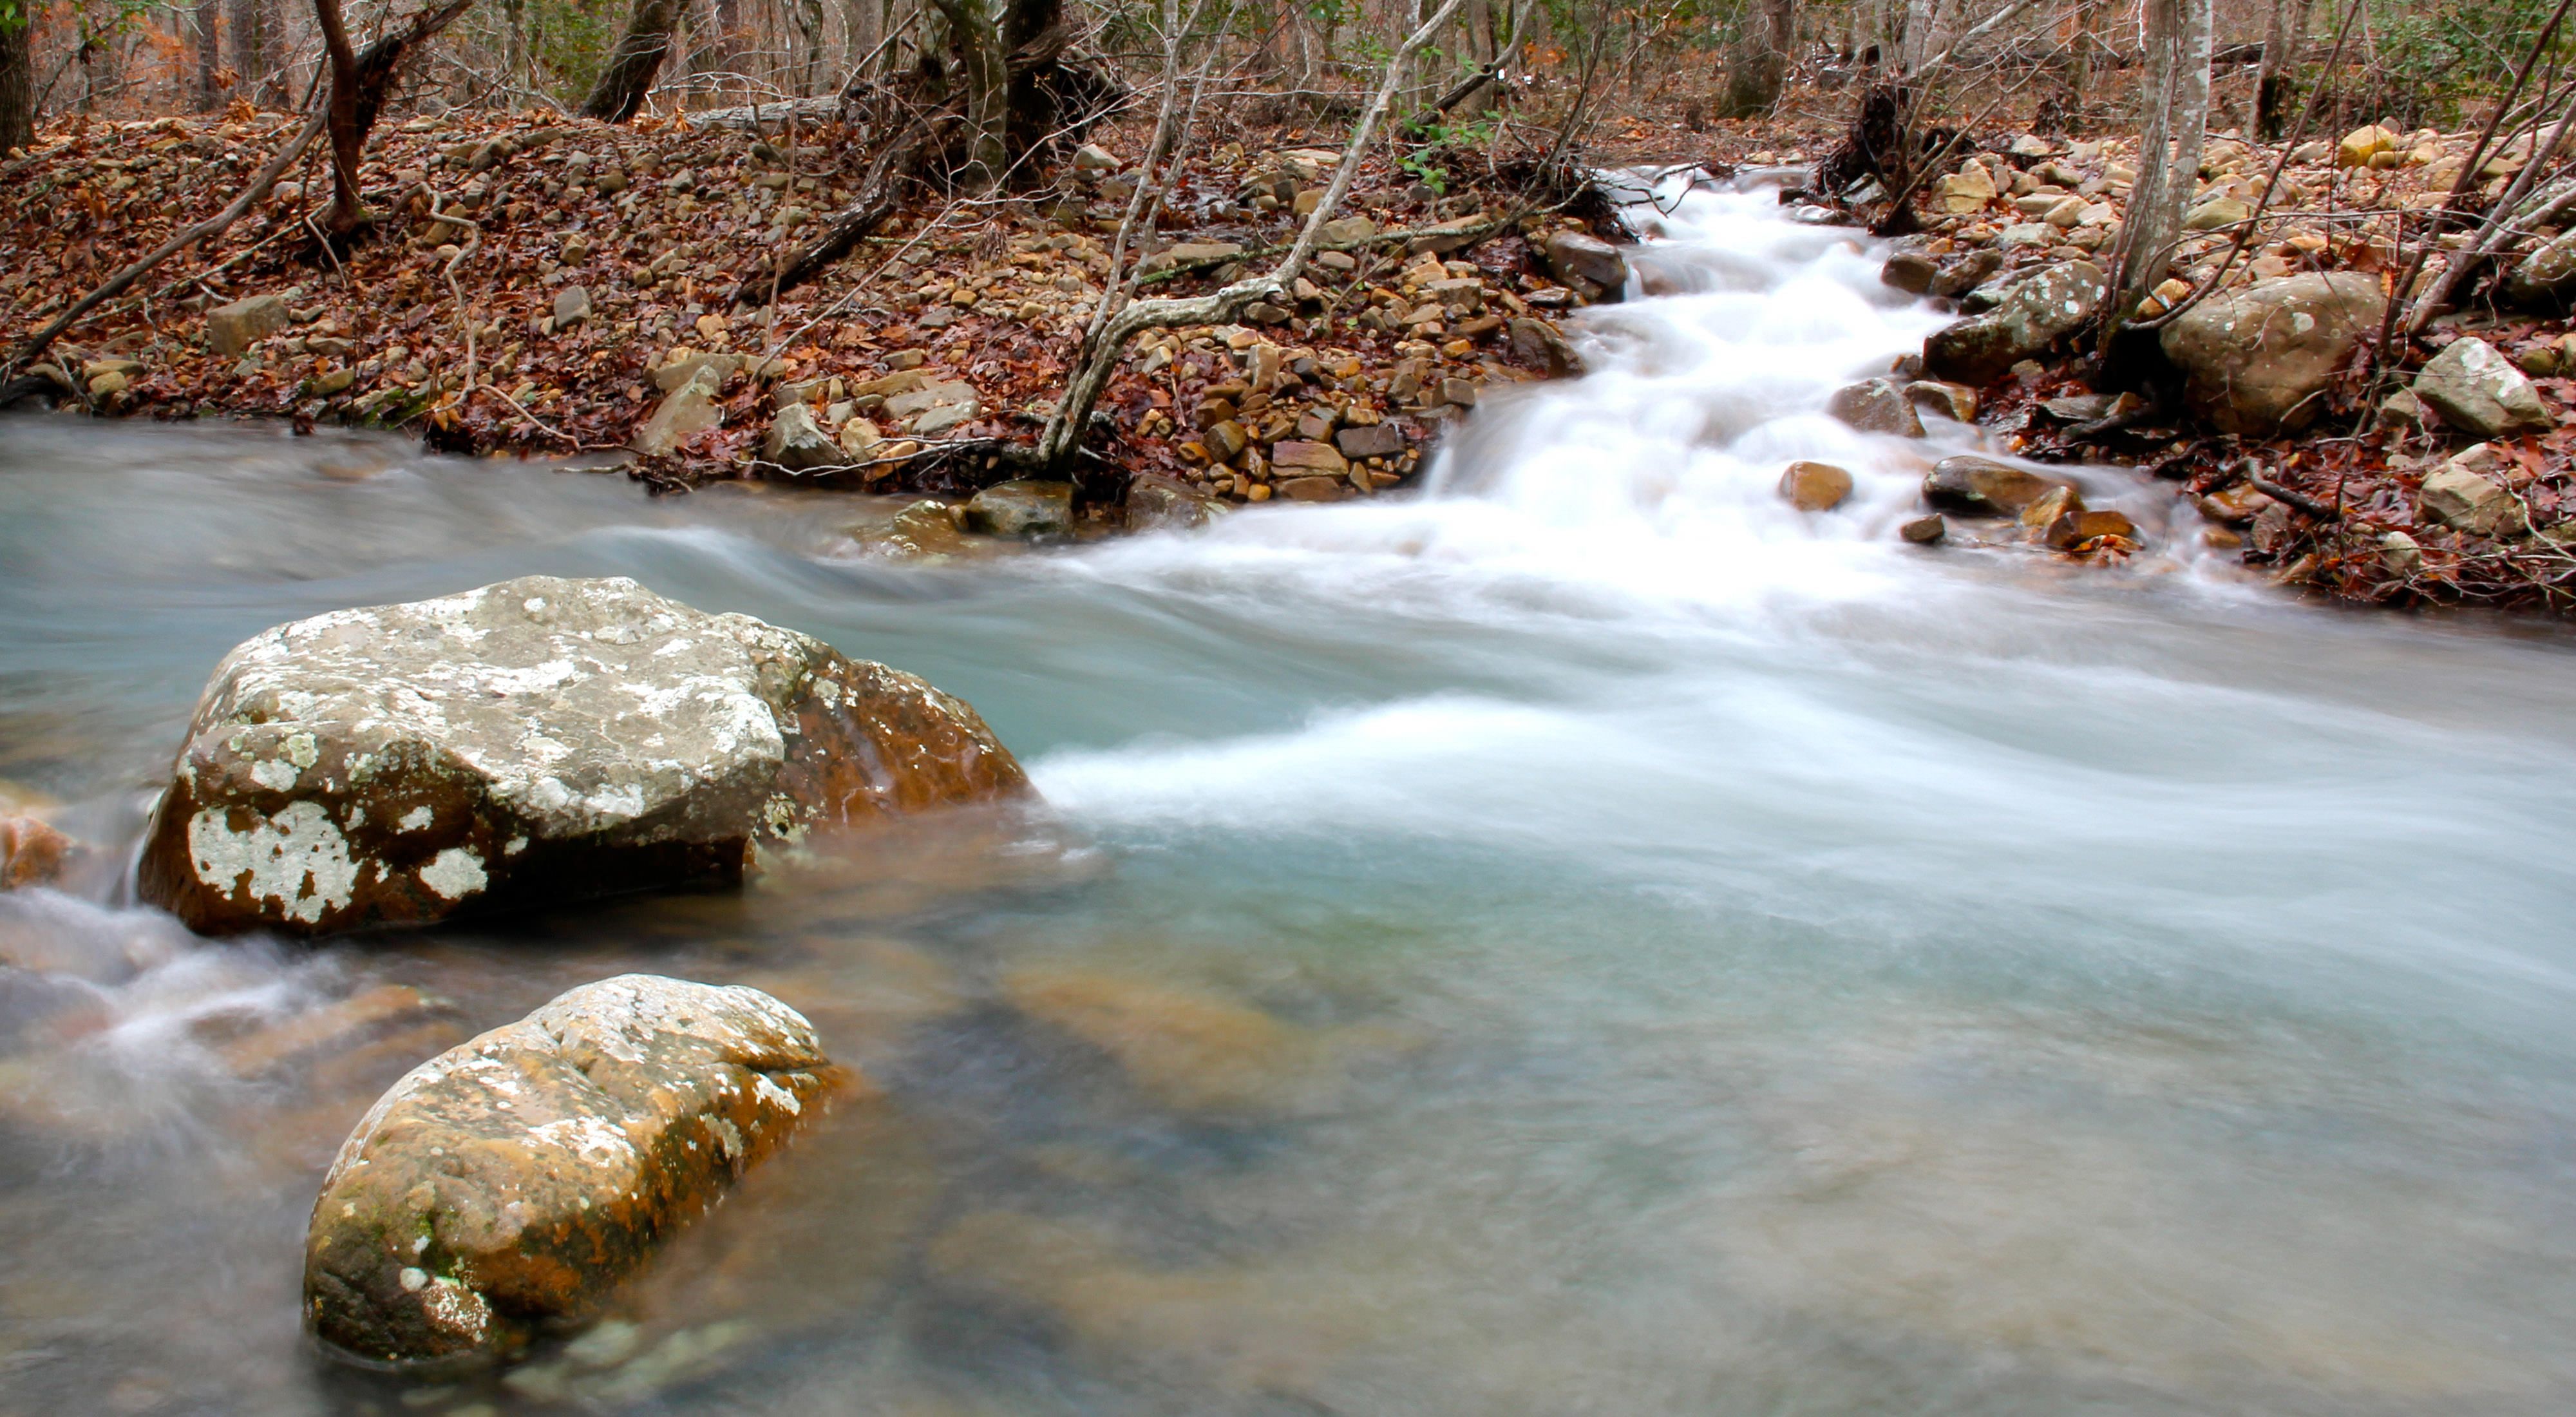 Fast-flowing waters in a small, rocky creek.